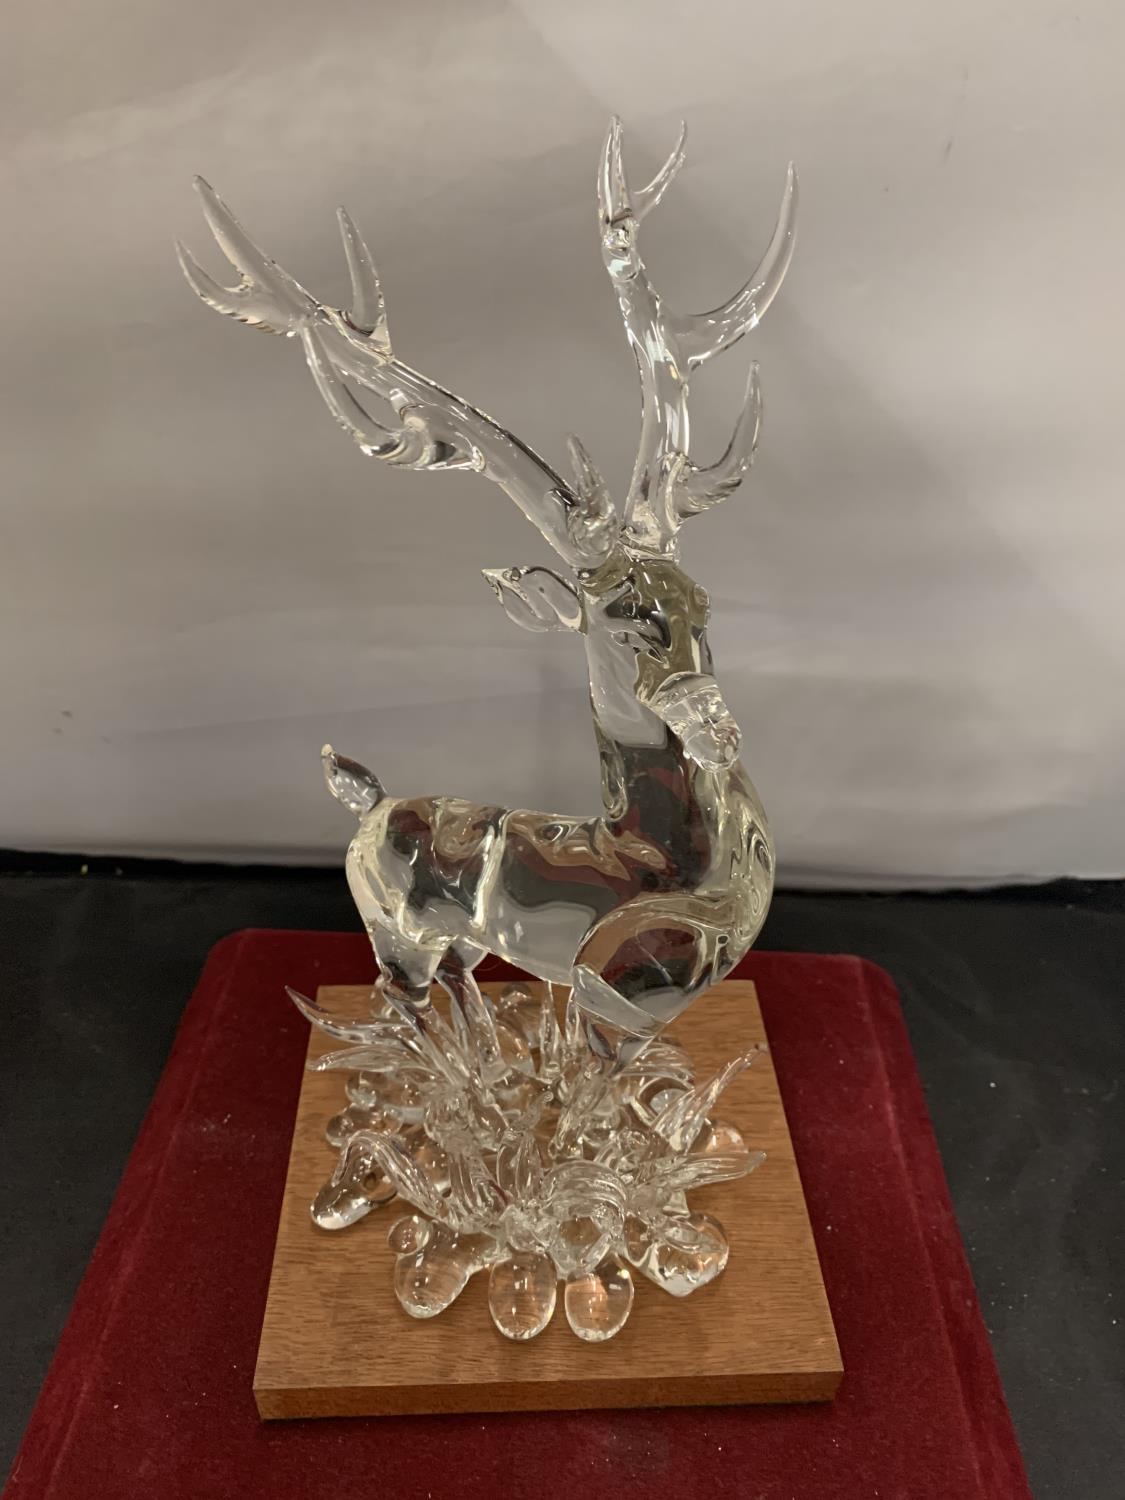 A CRYSTAL GLASS SCULPTURE BY BONILLA OF A STAG